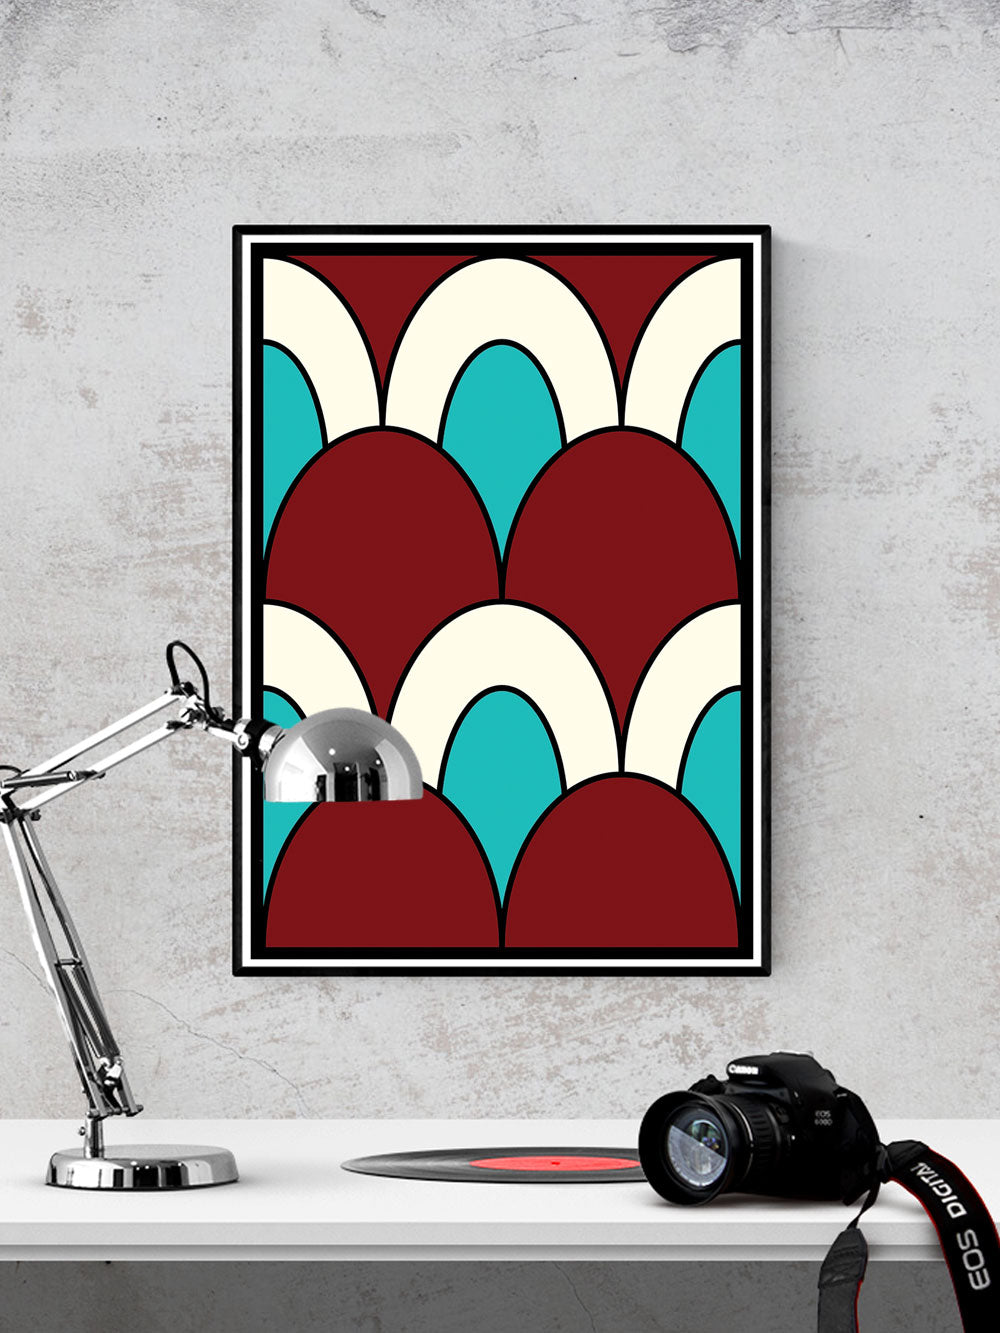 The Cherry Arch Pattern Print in a frame on a wall